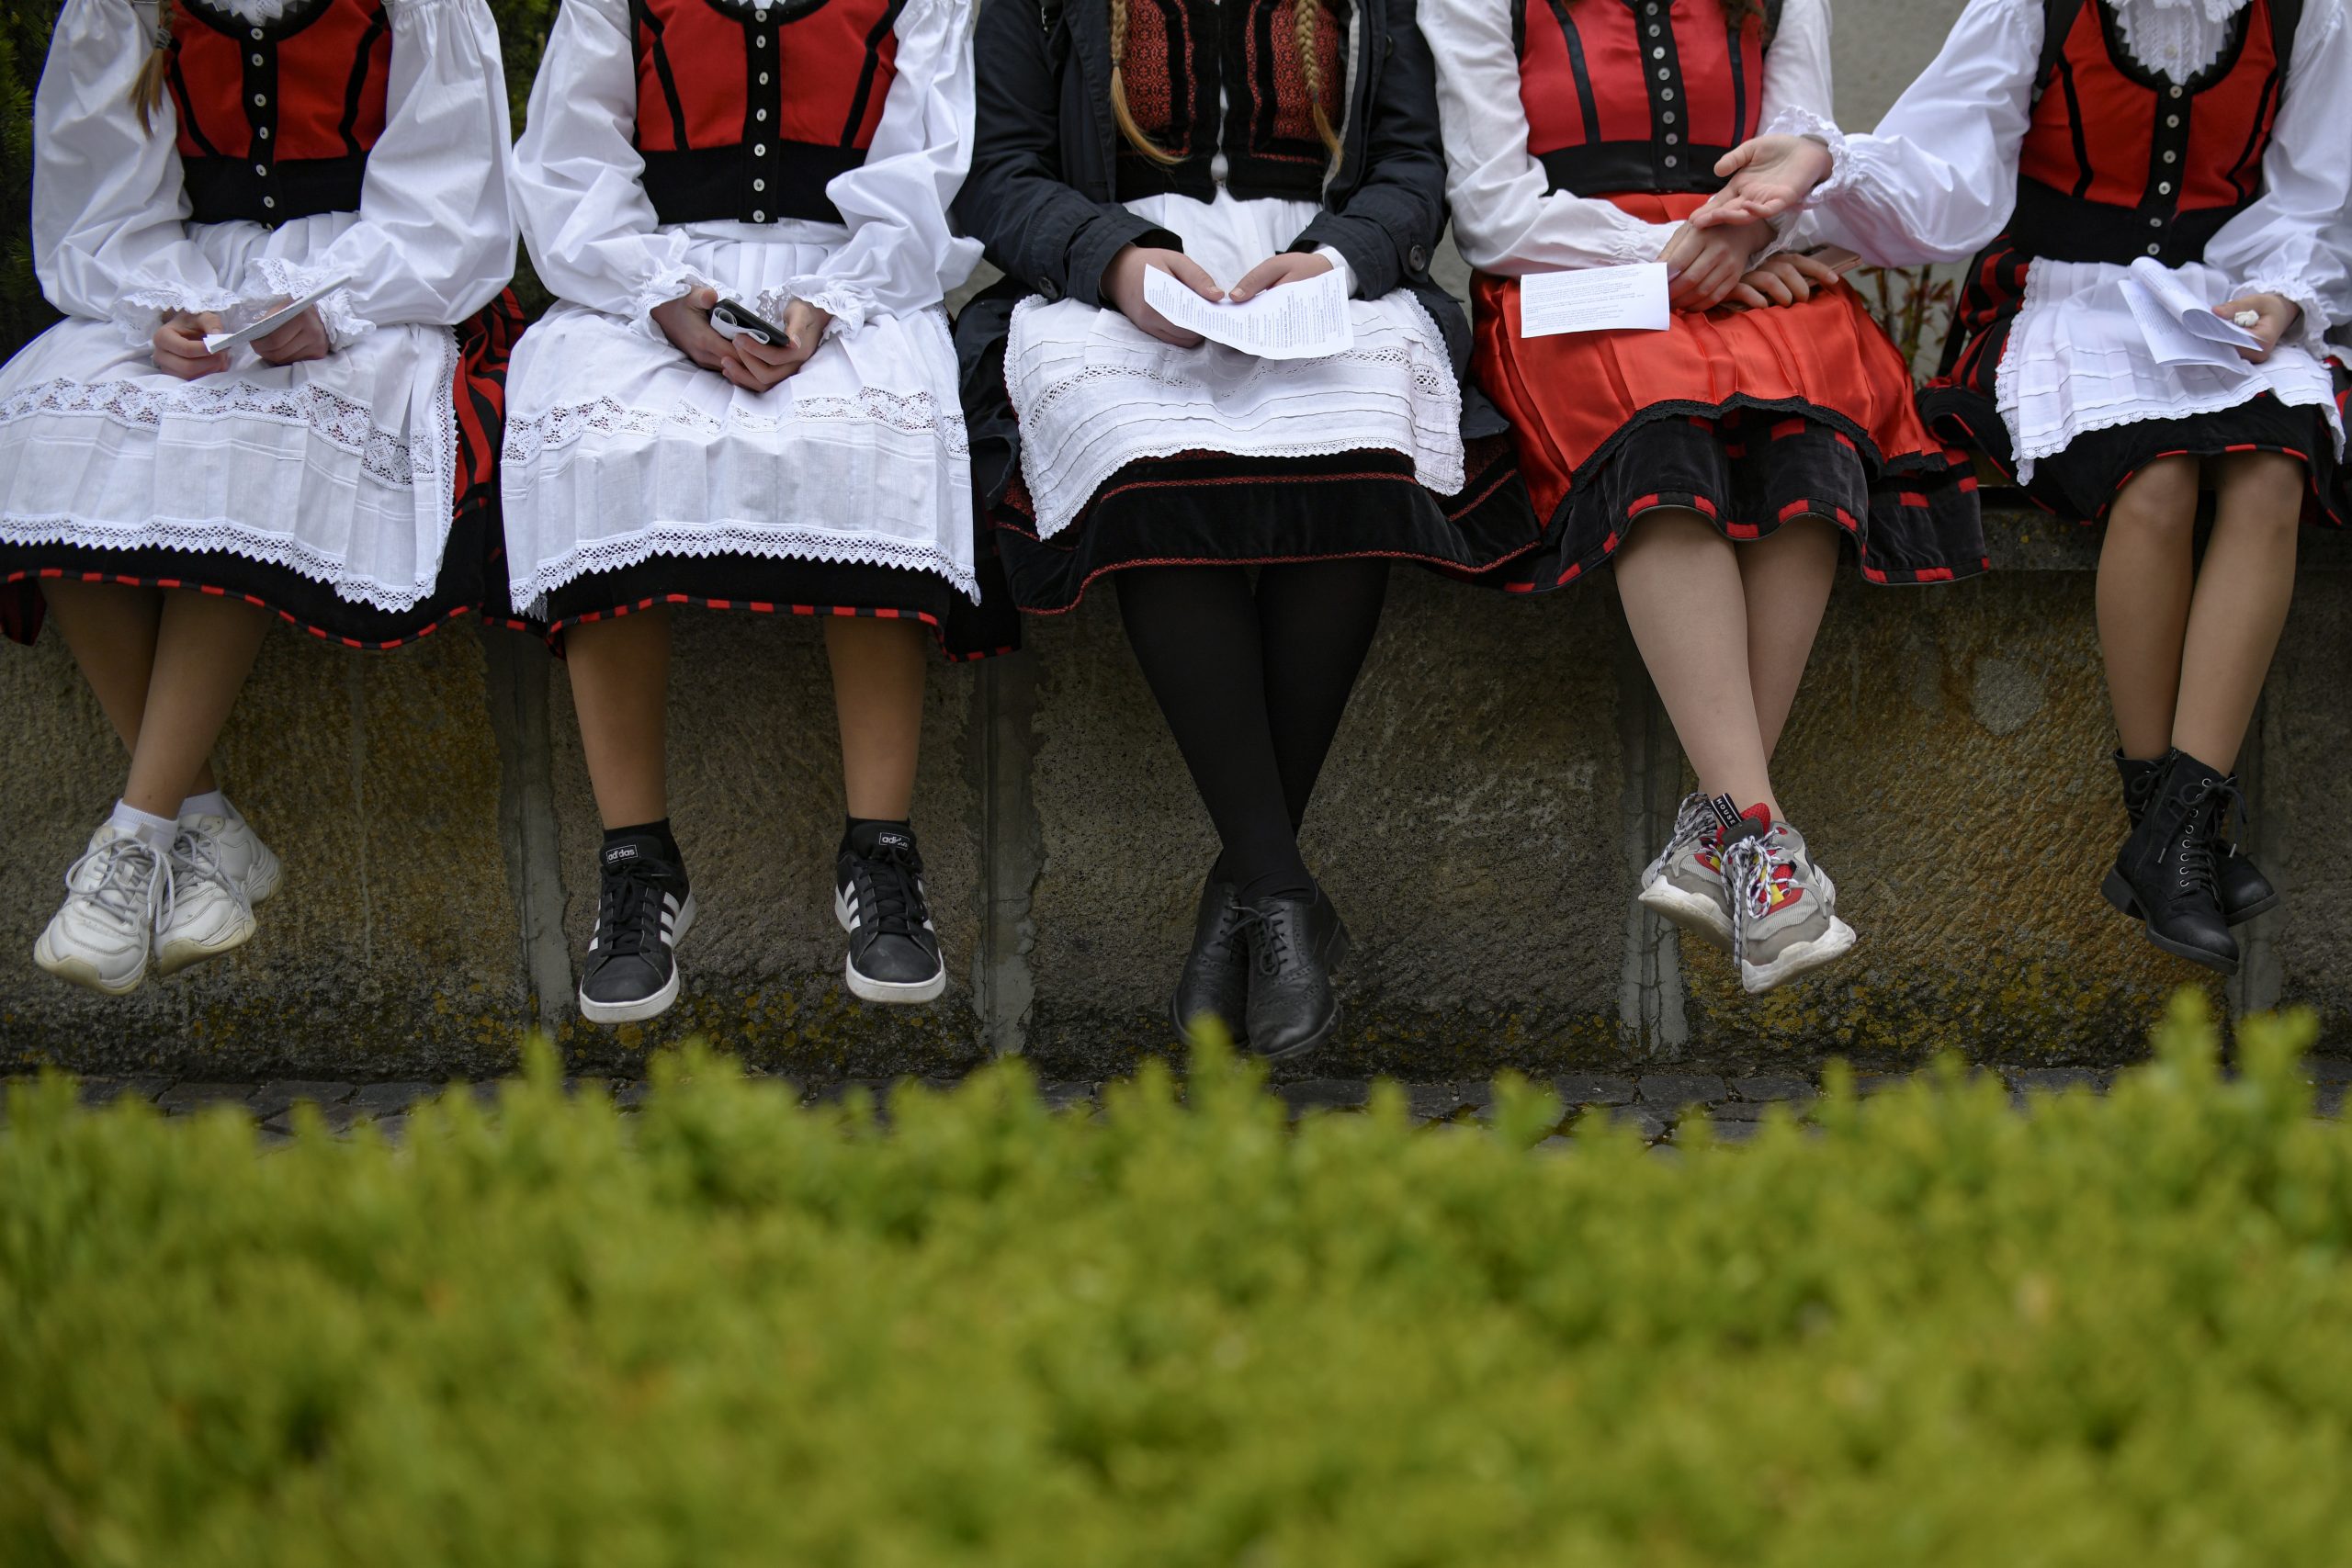 Girls dressed in traditional outfits rest during a Catholic pilgrimage attended by tens of thousands of people who joined the biggest religious event of their faith, in Sumuleu Ciuc, Romania on Saturday, May 22, 2021. Over 35,000 Catholic pilgrims gathered at an open-air shrine in Sumuleu Ciuc in Transylvania on Saturday for a centuries-old procession that was canceled last year due to the coronavirus pandemic.  (AP Photo / Andreea Alexandru)